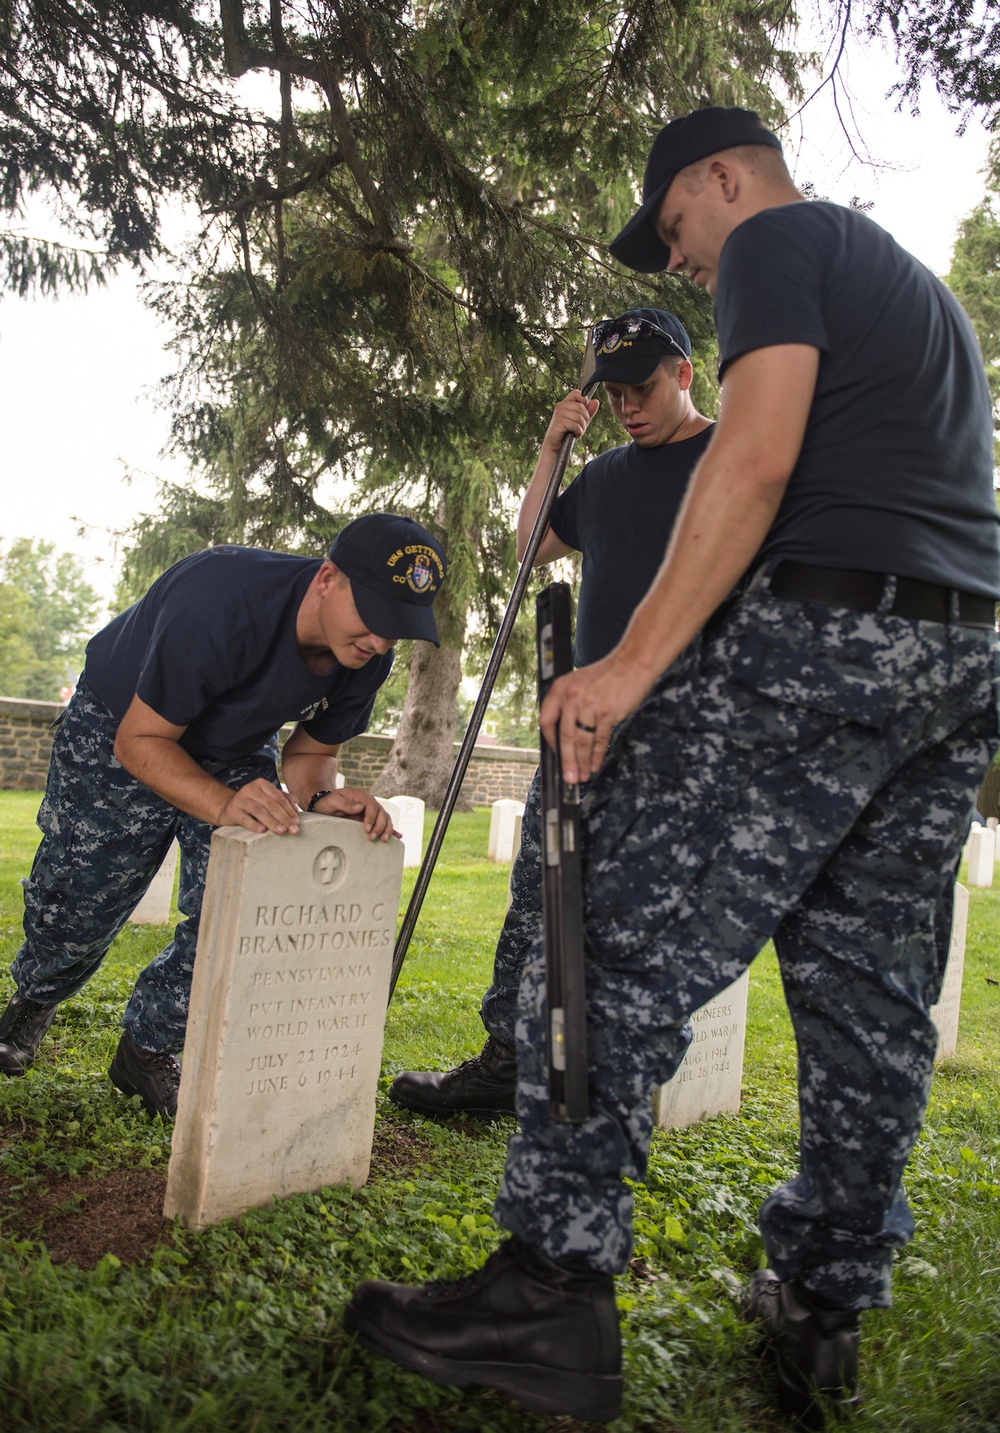 USS Gettysburg conducts service projects in namesake town